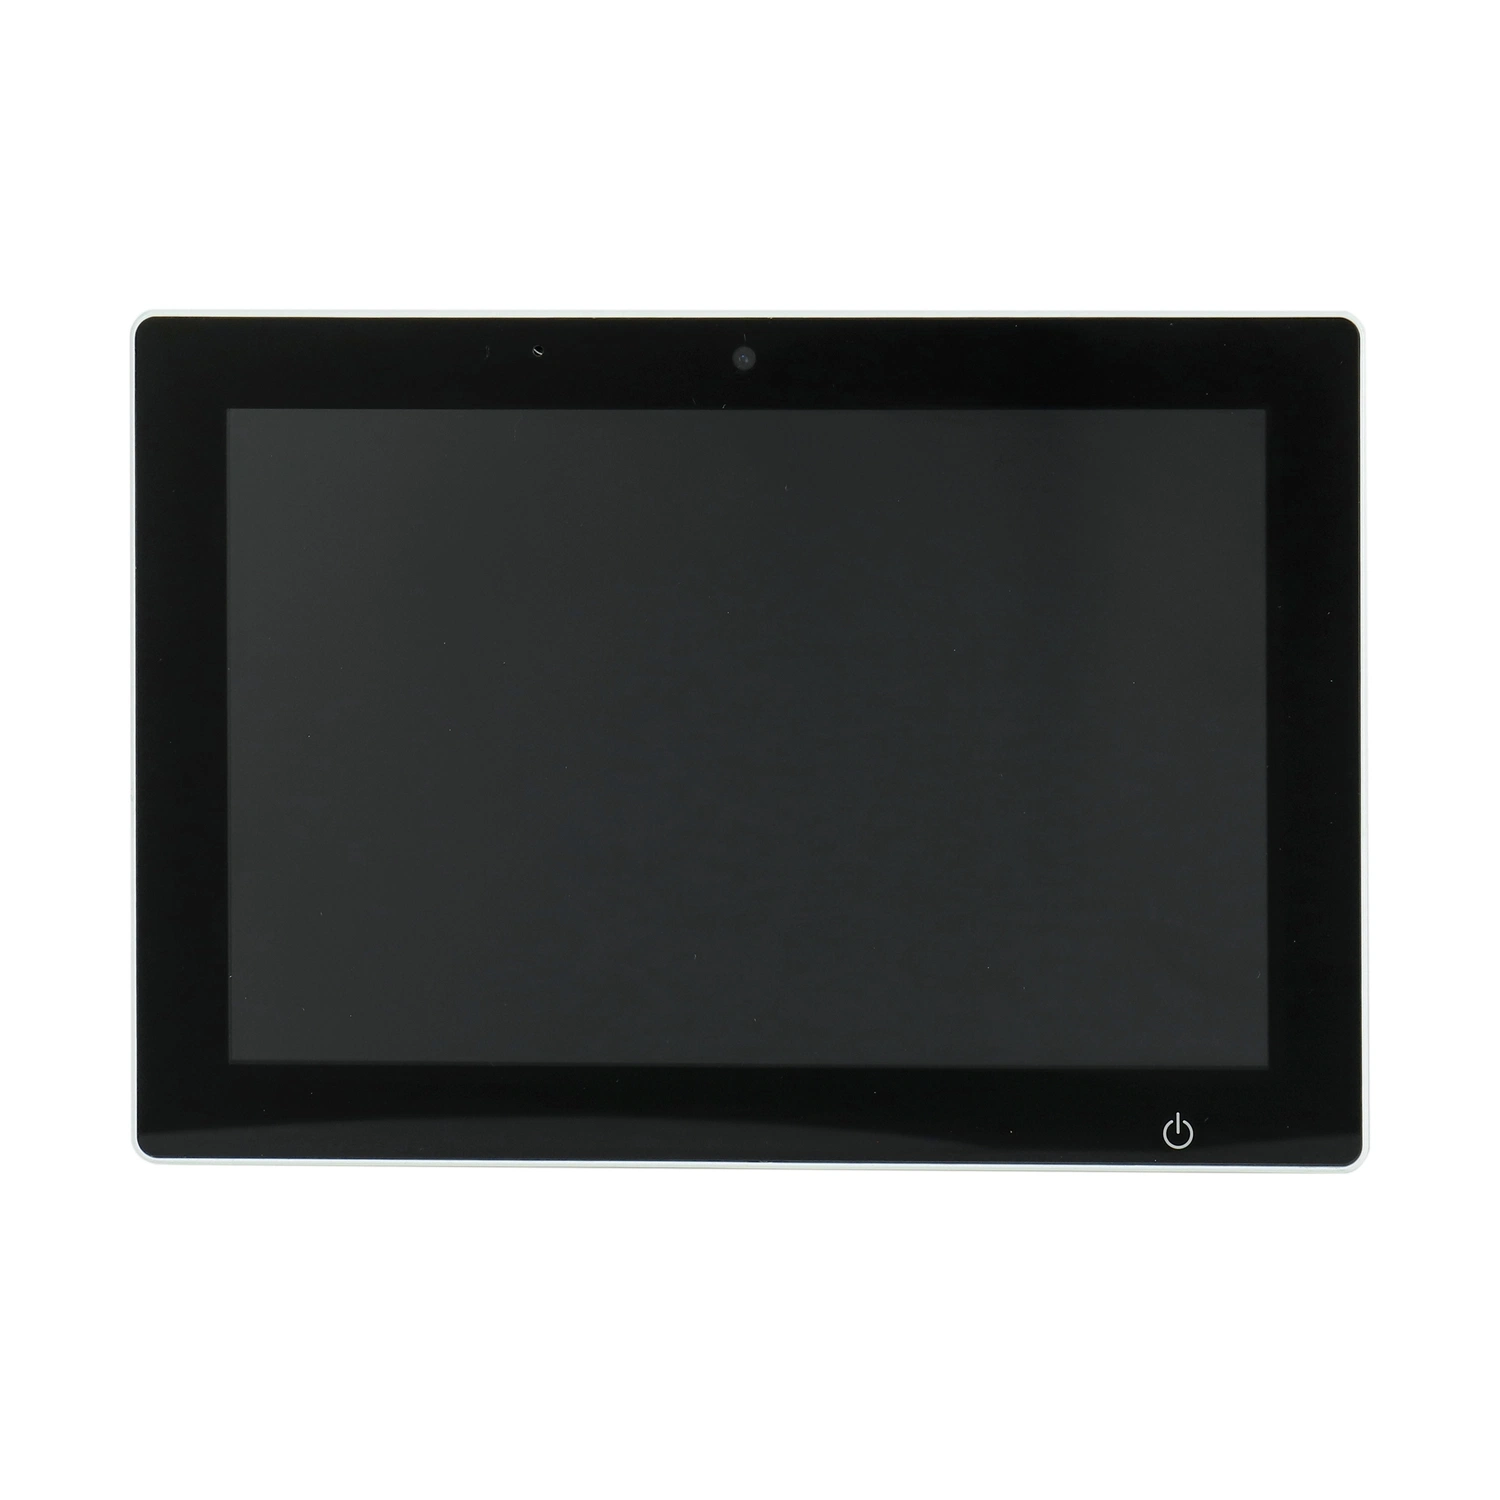 CE 10.1 Inch Aio Meeting Room Industrial Interactive Capacitive Touch Panel WiFi USB-C Bluetooth Linux Windows Desktop Smart Rk3588 Android Tablet All in One PC